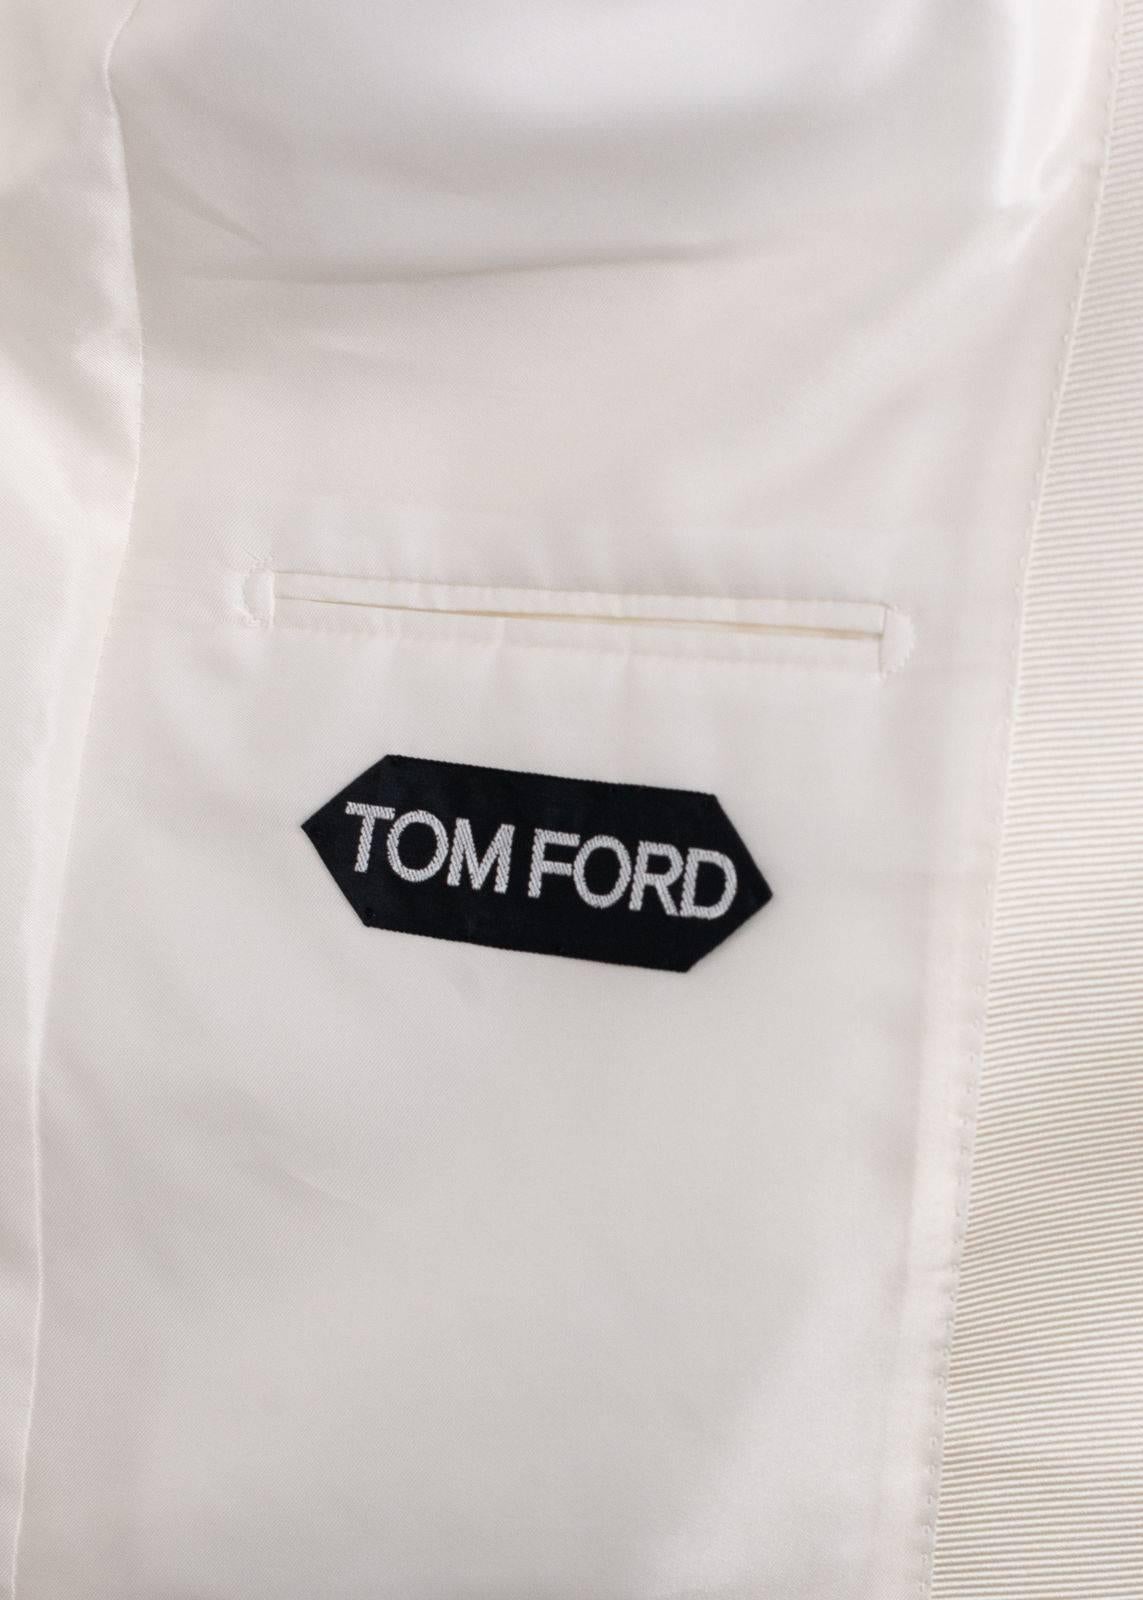 Peak anyone's interest in your Tom Ford Shelton jacket. This cocktail Jacket features a textured peak lapel, single button closure, and rich silk blended textures. You can pair this cocktail jacket with dark streamlined slacks and polished leather